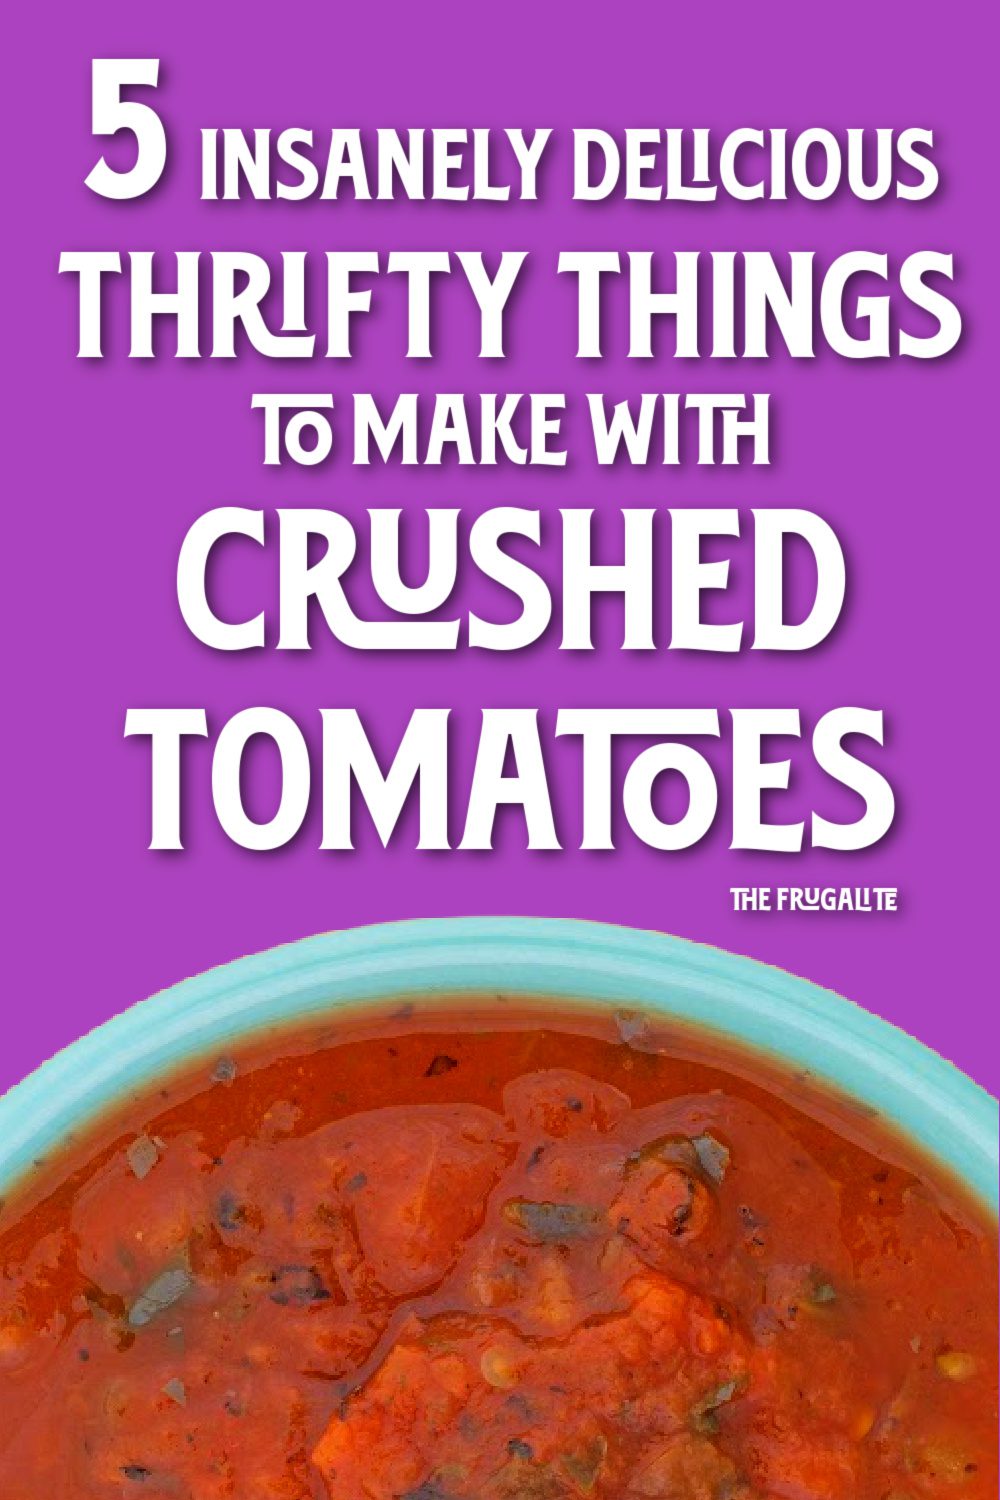 5 Insanely Delicious Thrifty Things to Make with Crushed Tomatoes